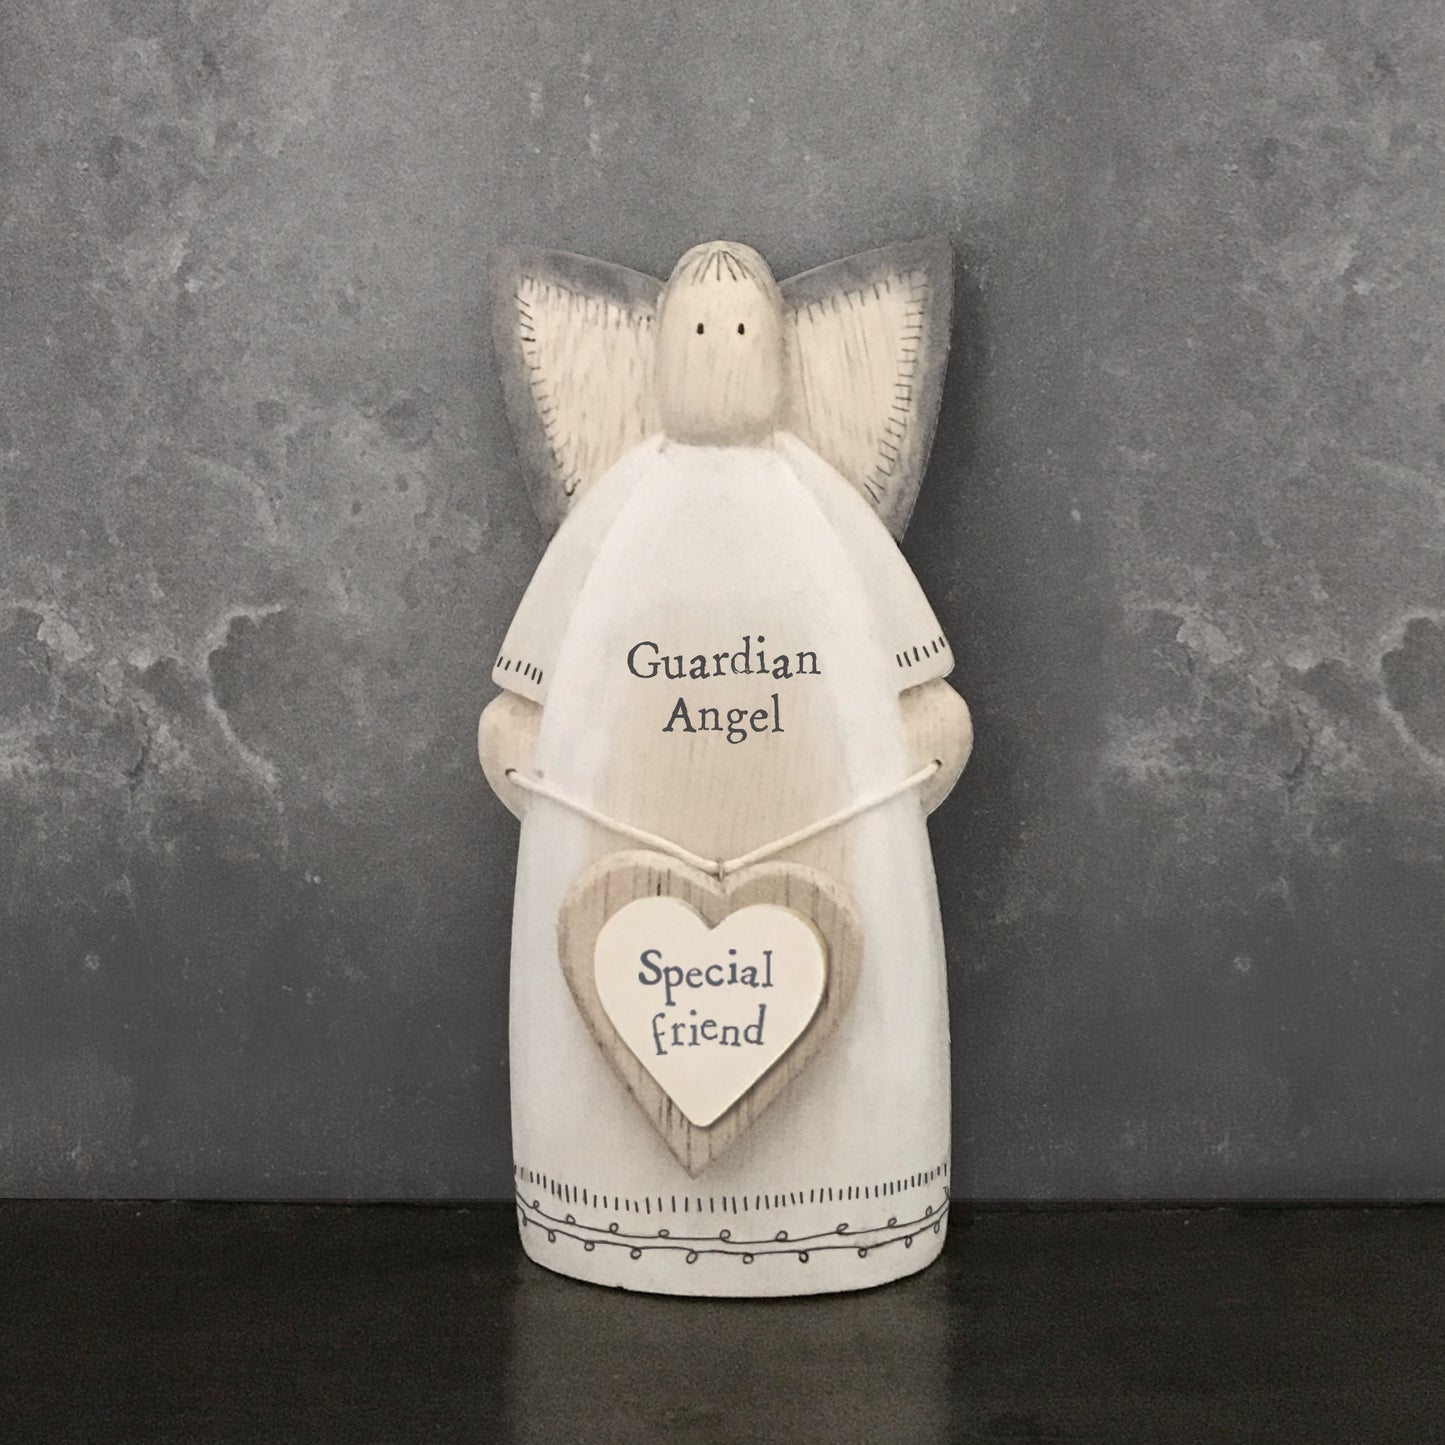 East Of India Special Friend Guardian Angel Wooden Ornament